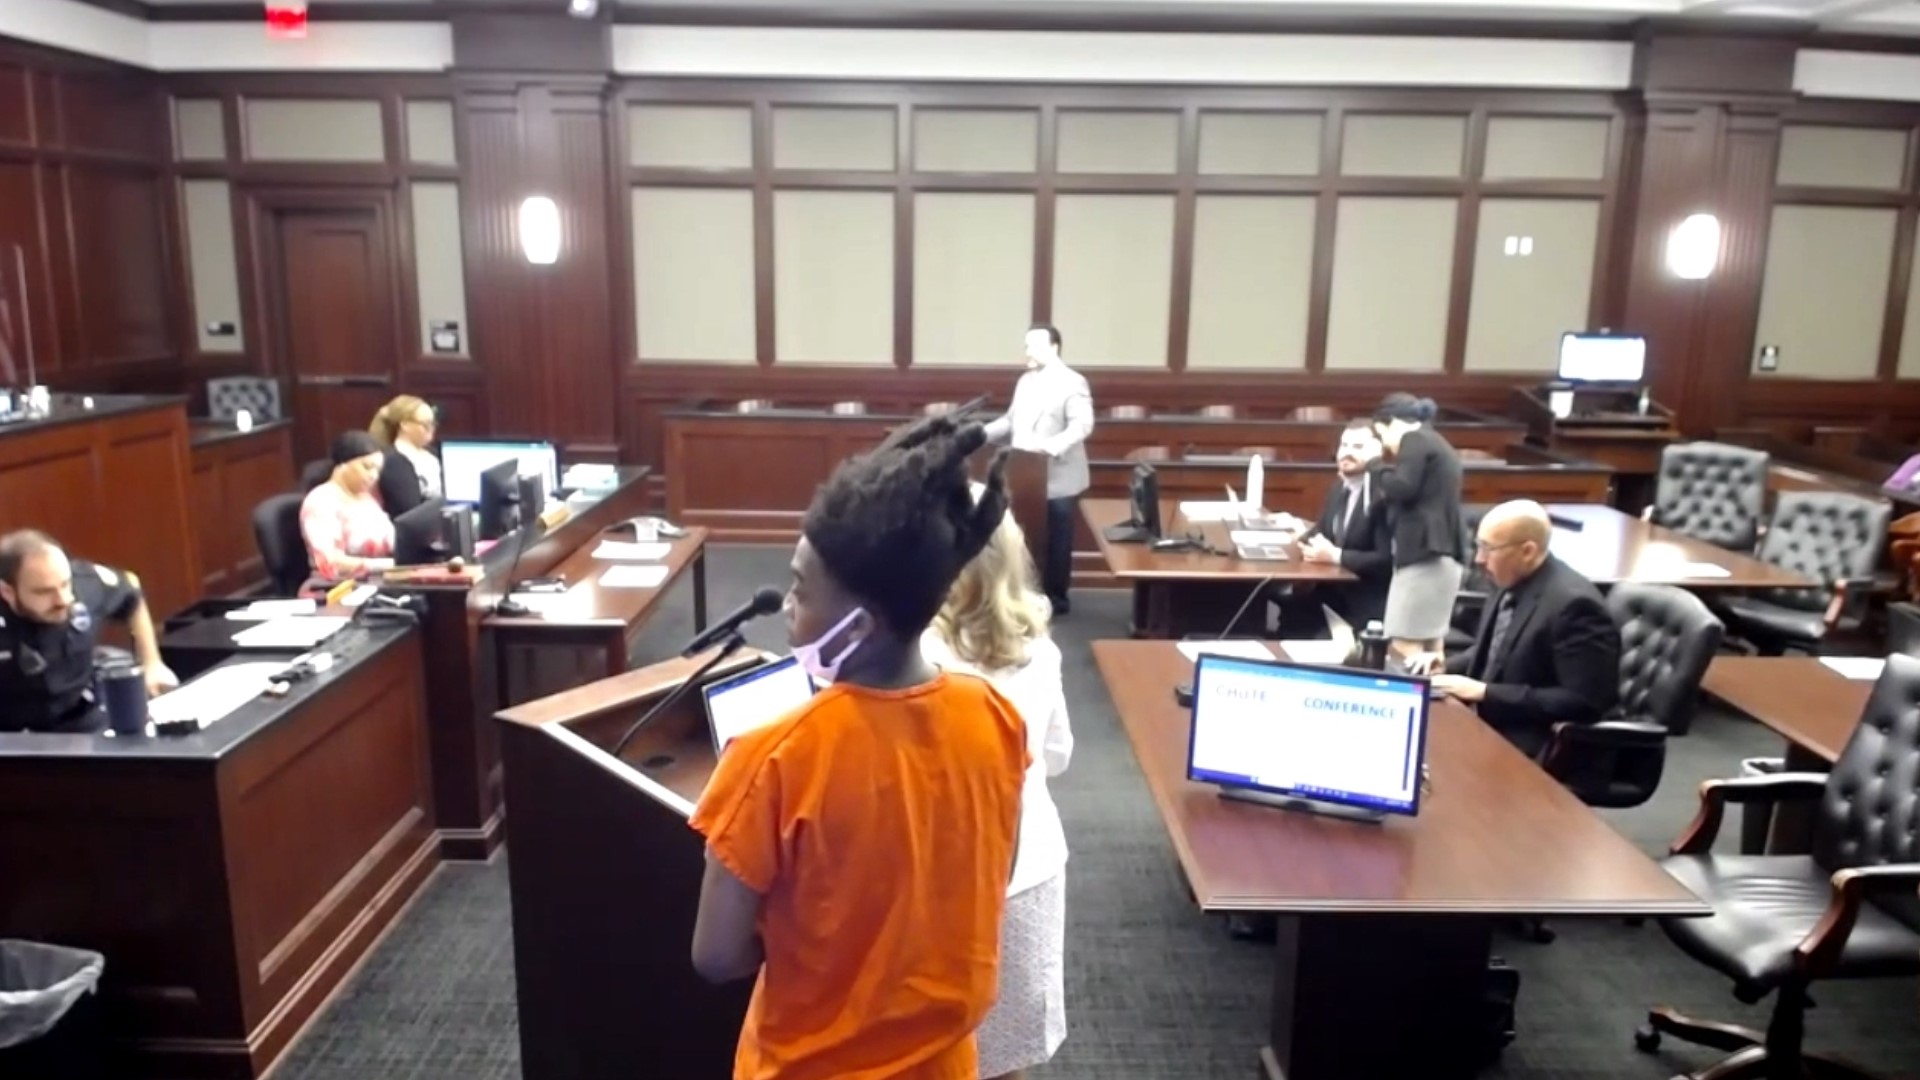 Leroy Whitaker, known as ATK Scotty, appeared in Duval County court Thursday. He's accused of killing Charles McCormick, a Jacksonville rapper known as Lil Buck.